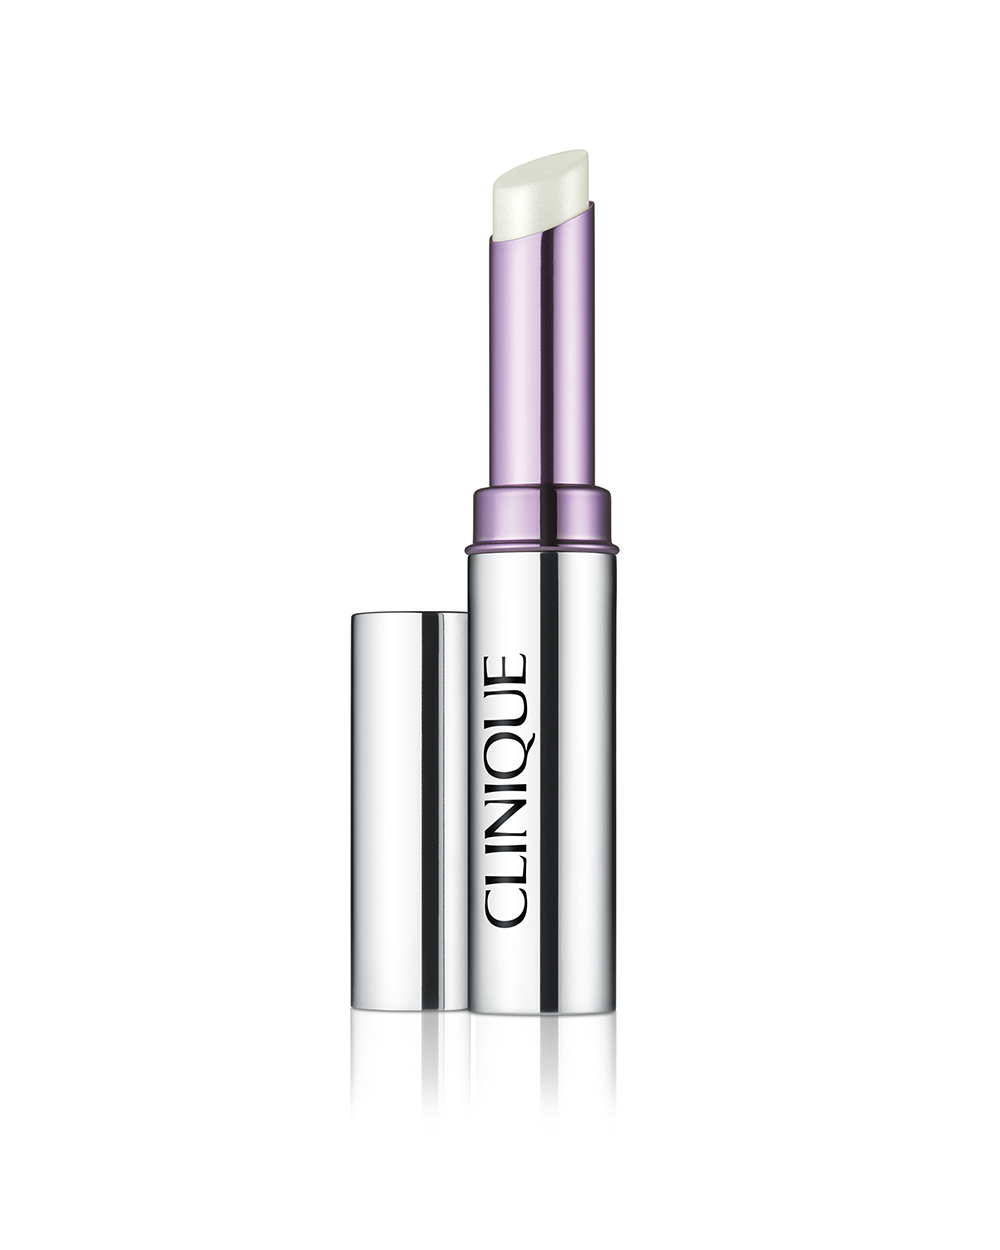 For a portable version of the classic cleansing balm, Clinique Take the Day Off Eye Make-Up Remover Stick, $48, melts onto the skin to remove even the most stubborn eye make-up